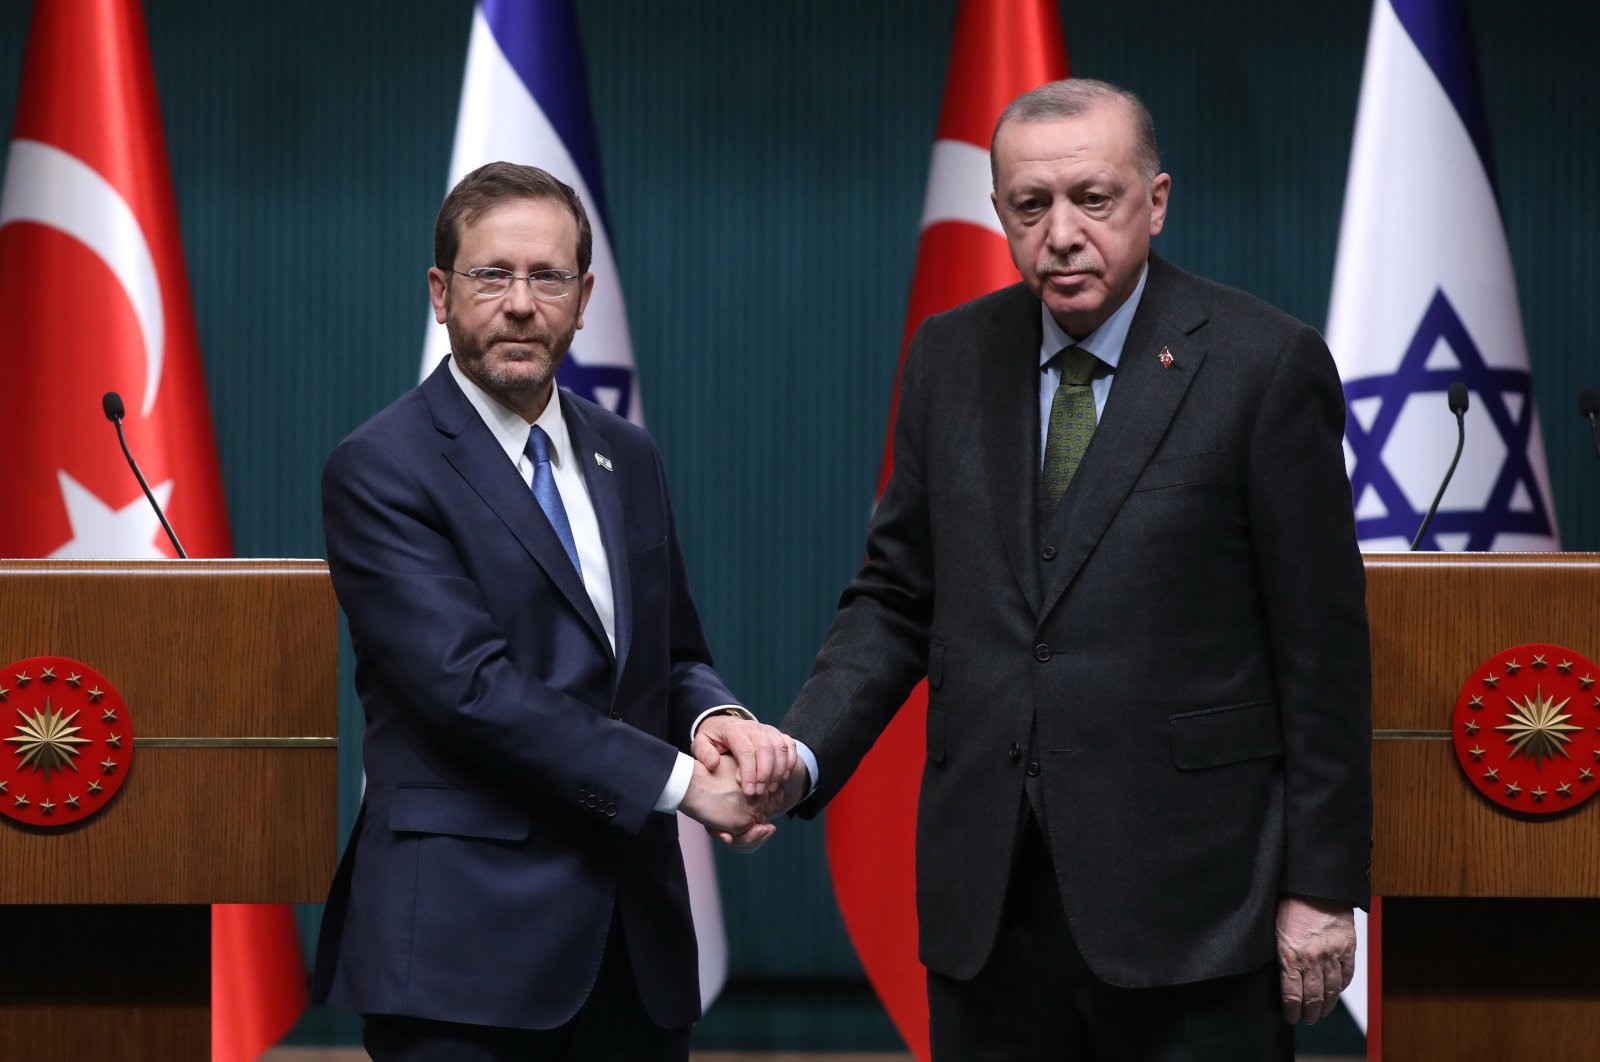 President Recep Tayyip Erdoğan (R) and Israeli President Isaac Herzog (L) attend a press conference after their meeting in Ankara, Turkey, March 9, 2022. (EPA File Photo)